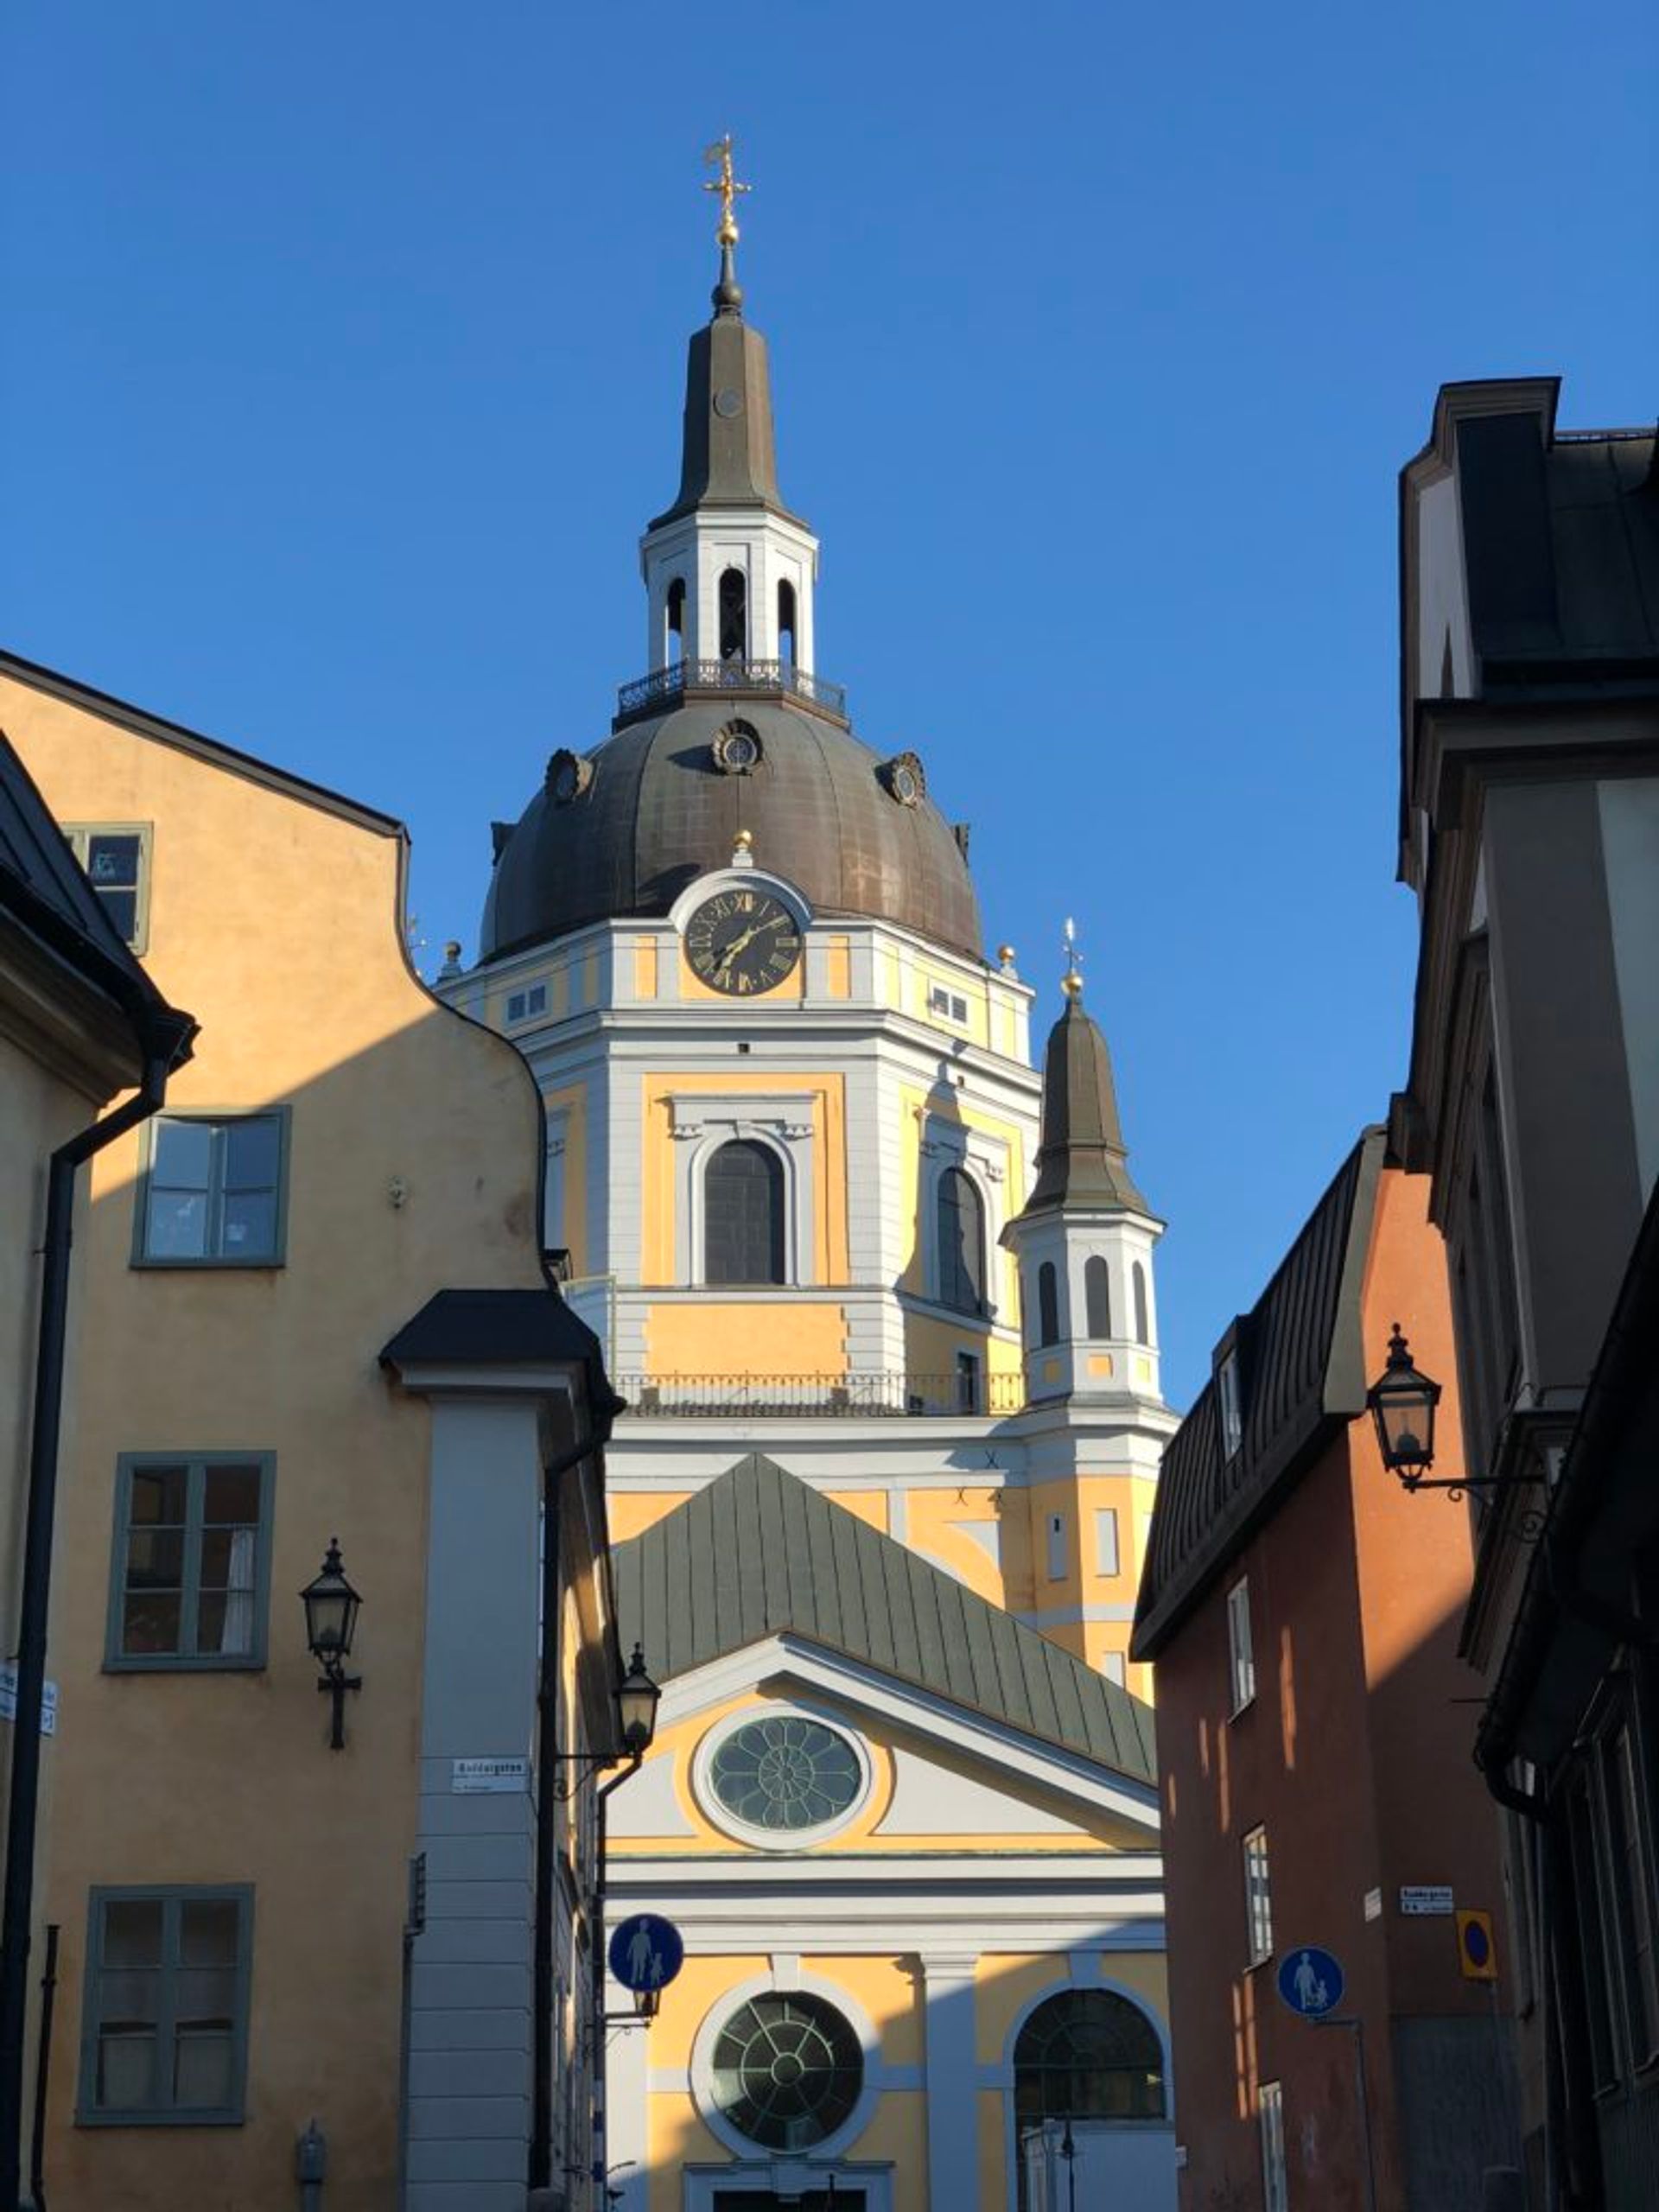 Early evening (or late morning, I can't remember), a church on Södermalm, Stockholm